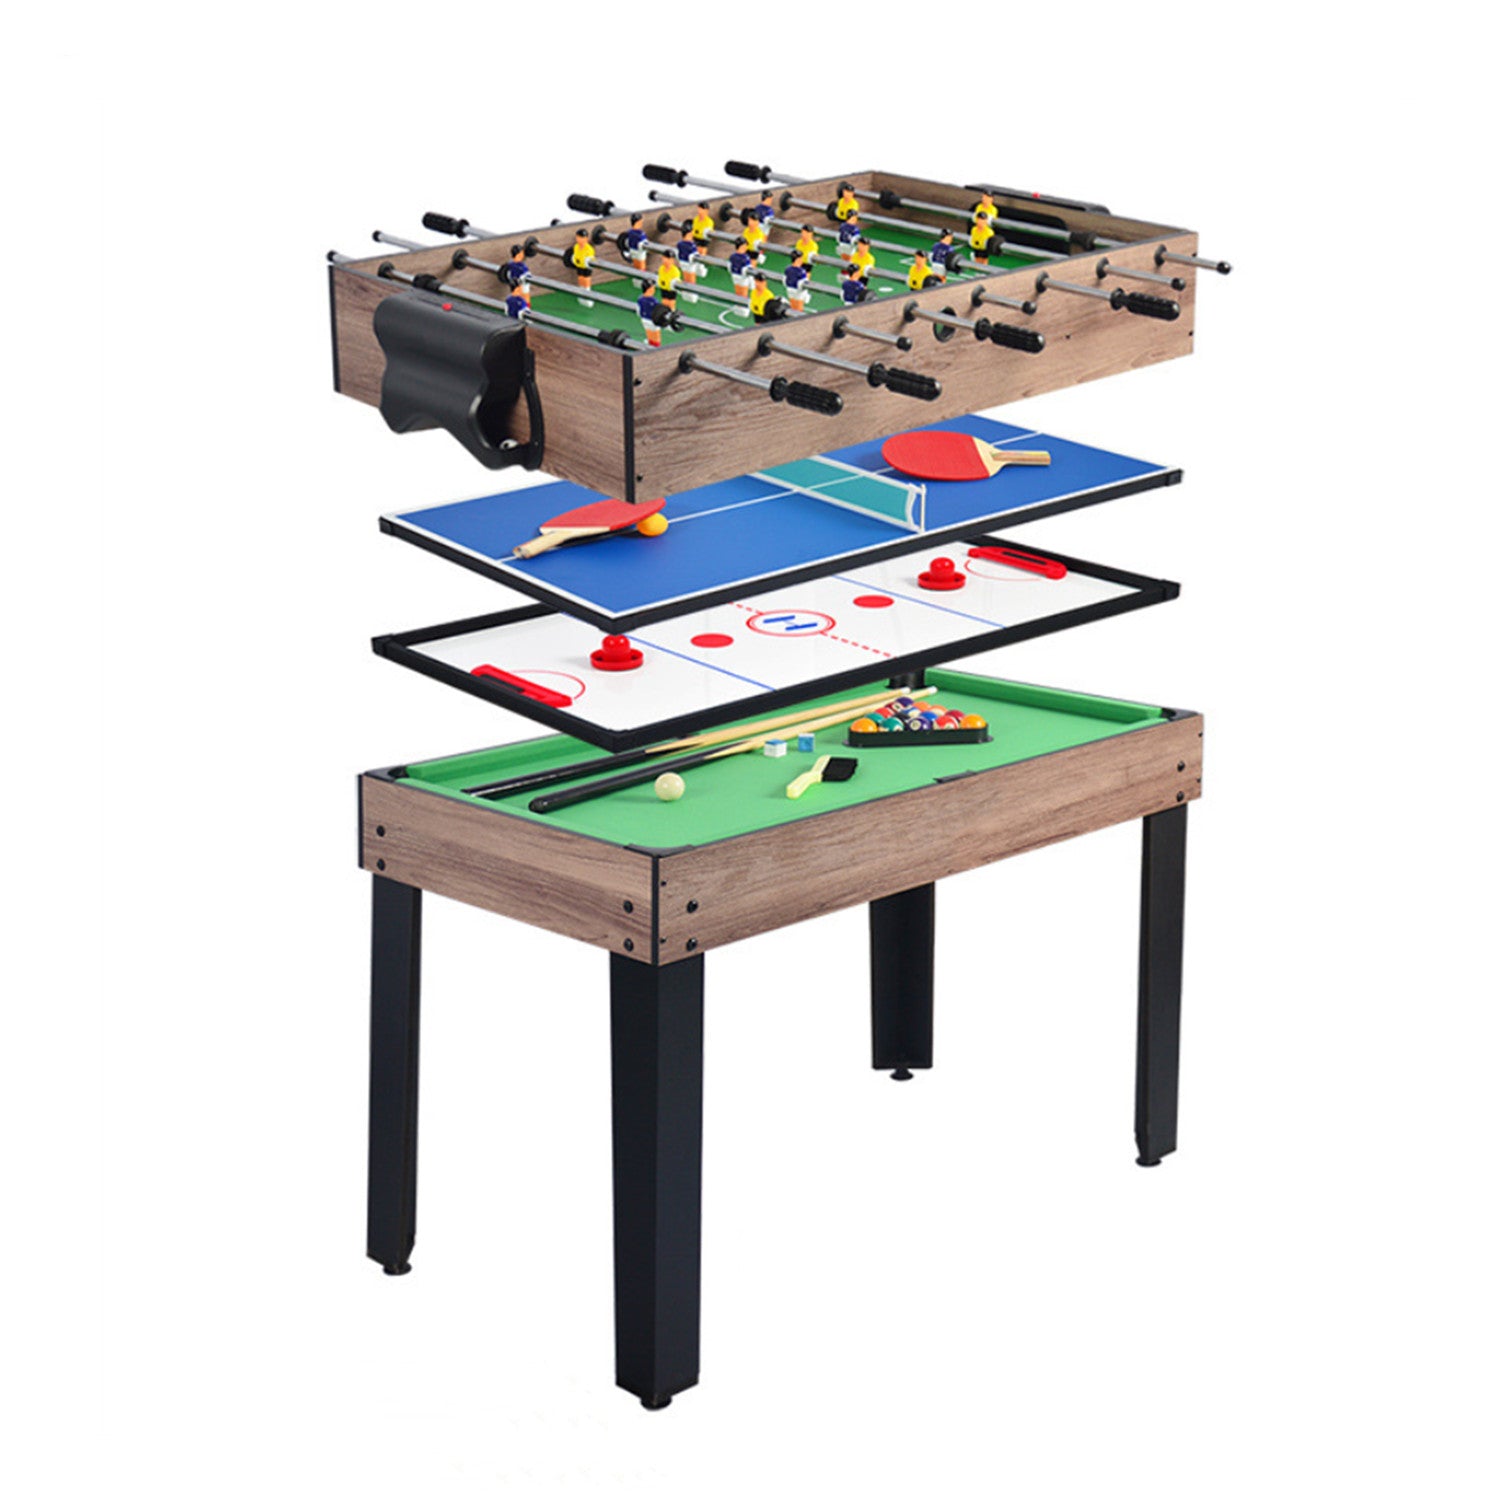 4FT 4IN1 Multi Game Table Pool/Air Hockey/Table Tennis Table /Football